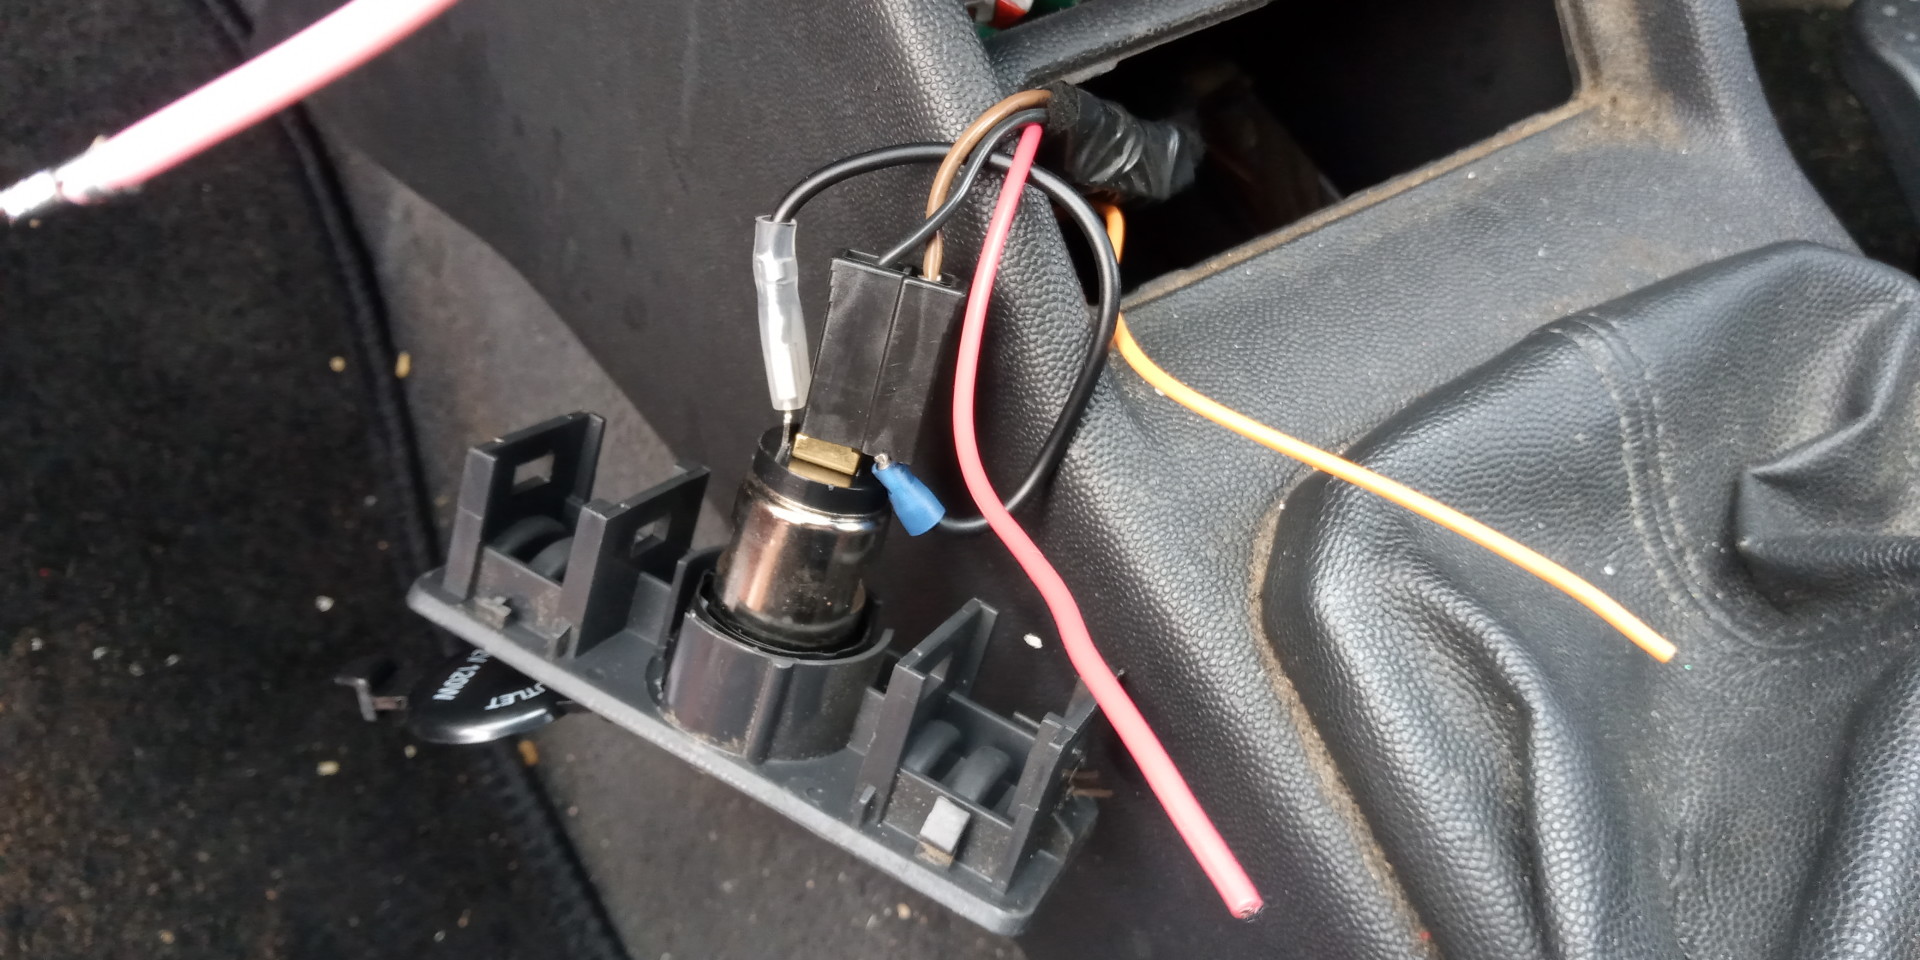 Lighter socket showing my two cables that I need to connect. Could someone tell me where they go please?